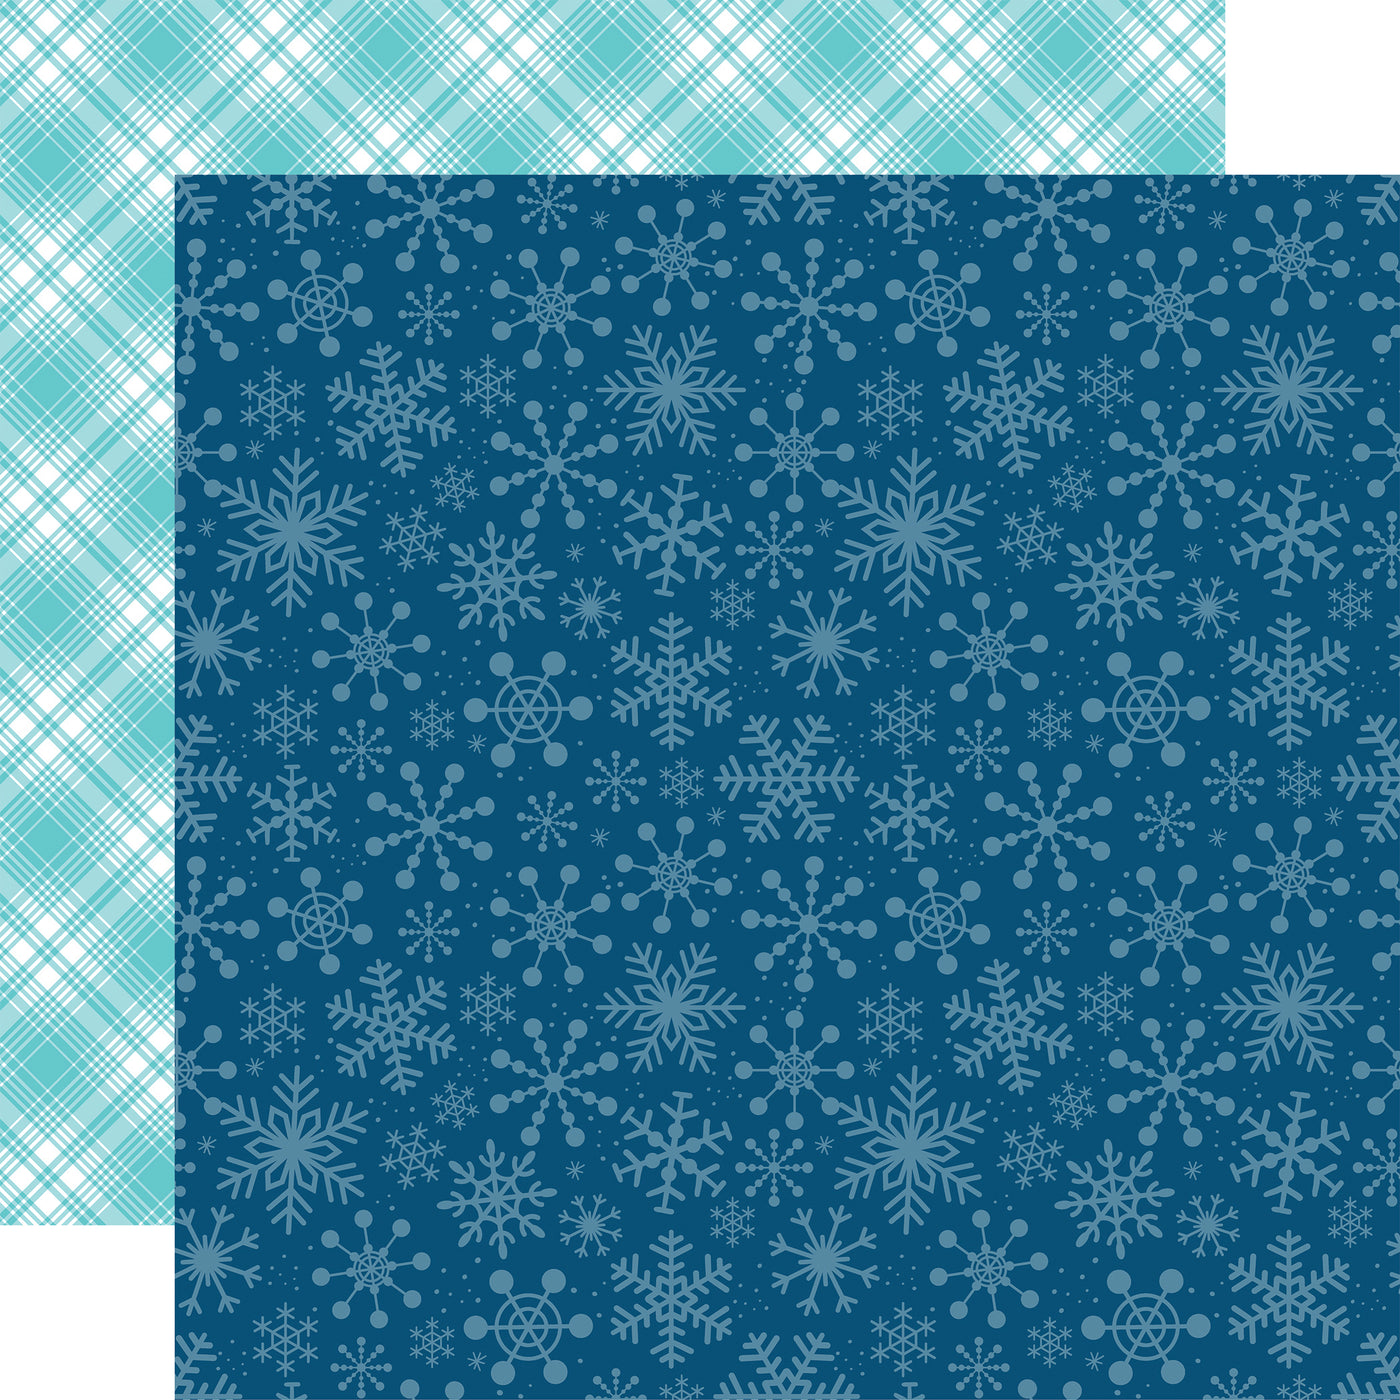 Multi-Colored (Side A - blue snowflakes on a navy blue background, Side B - sky blue plaid on a white background)